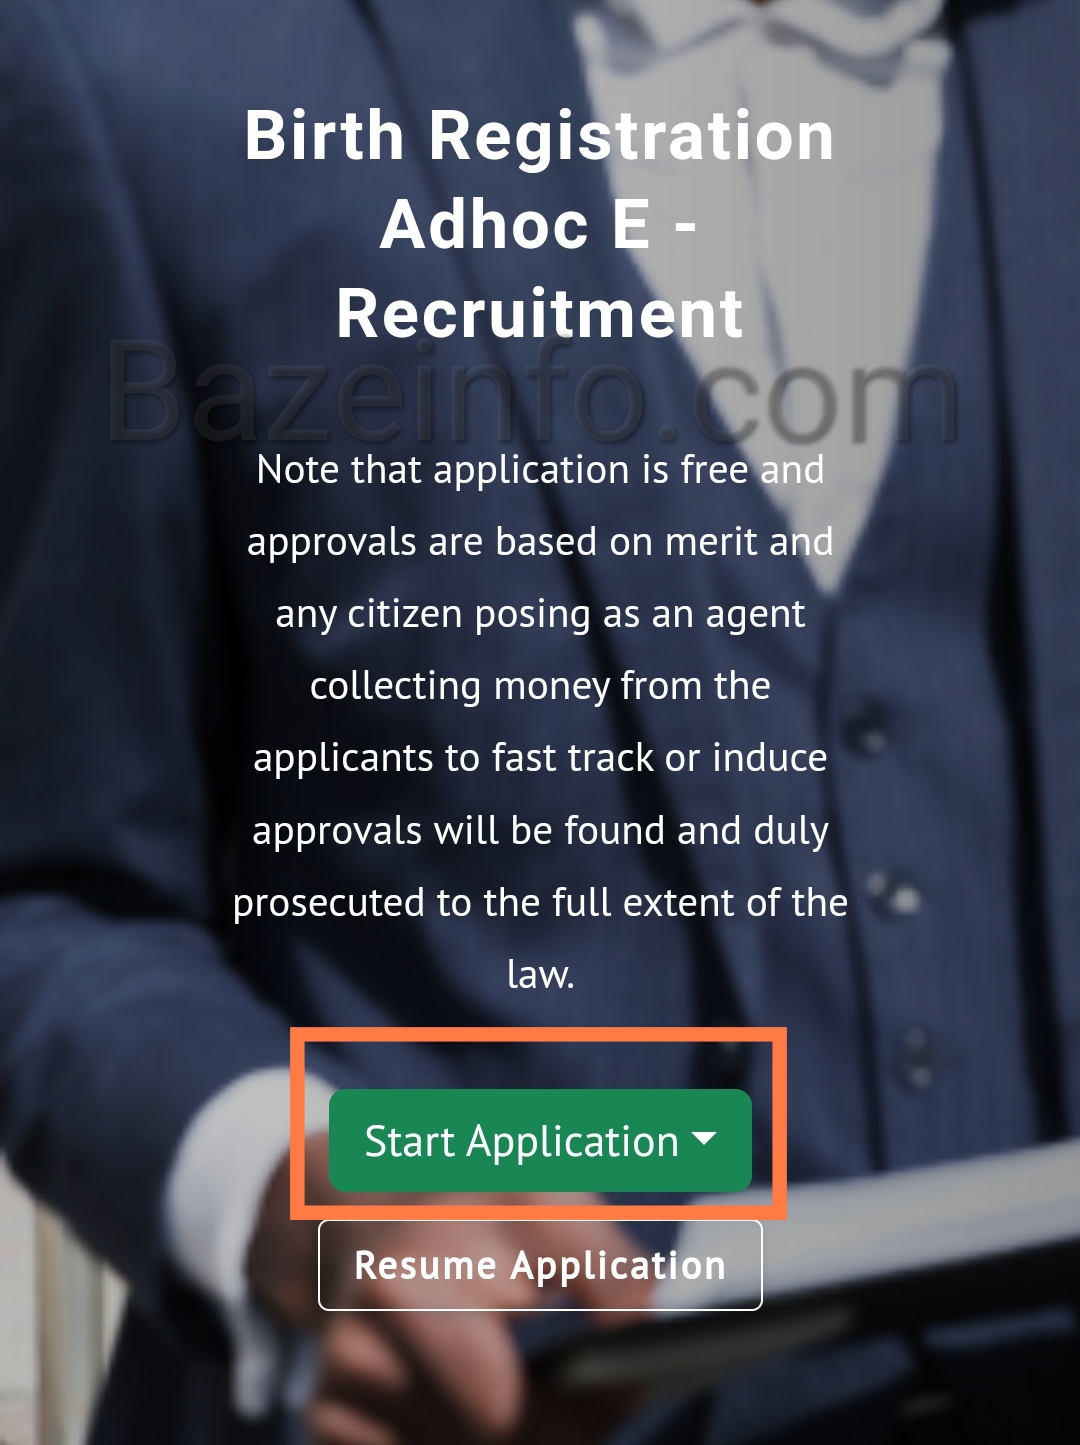 How to Apply For Birth Registration Adhoc E - Recruitment